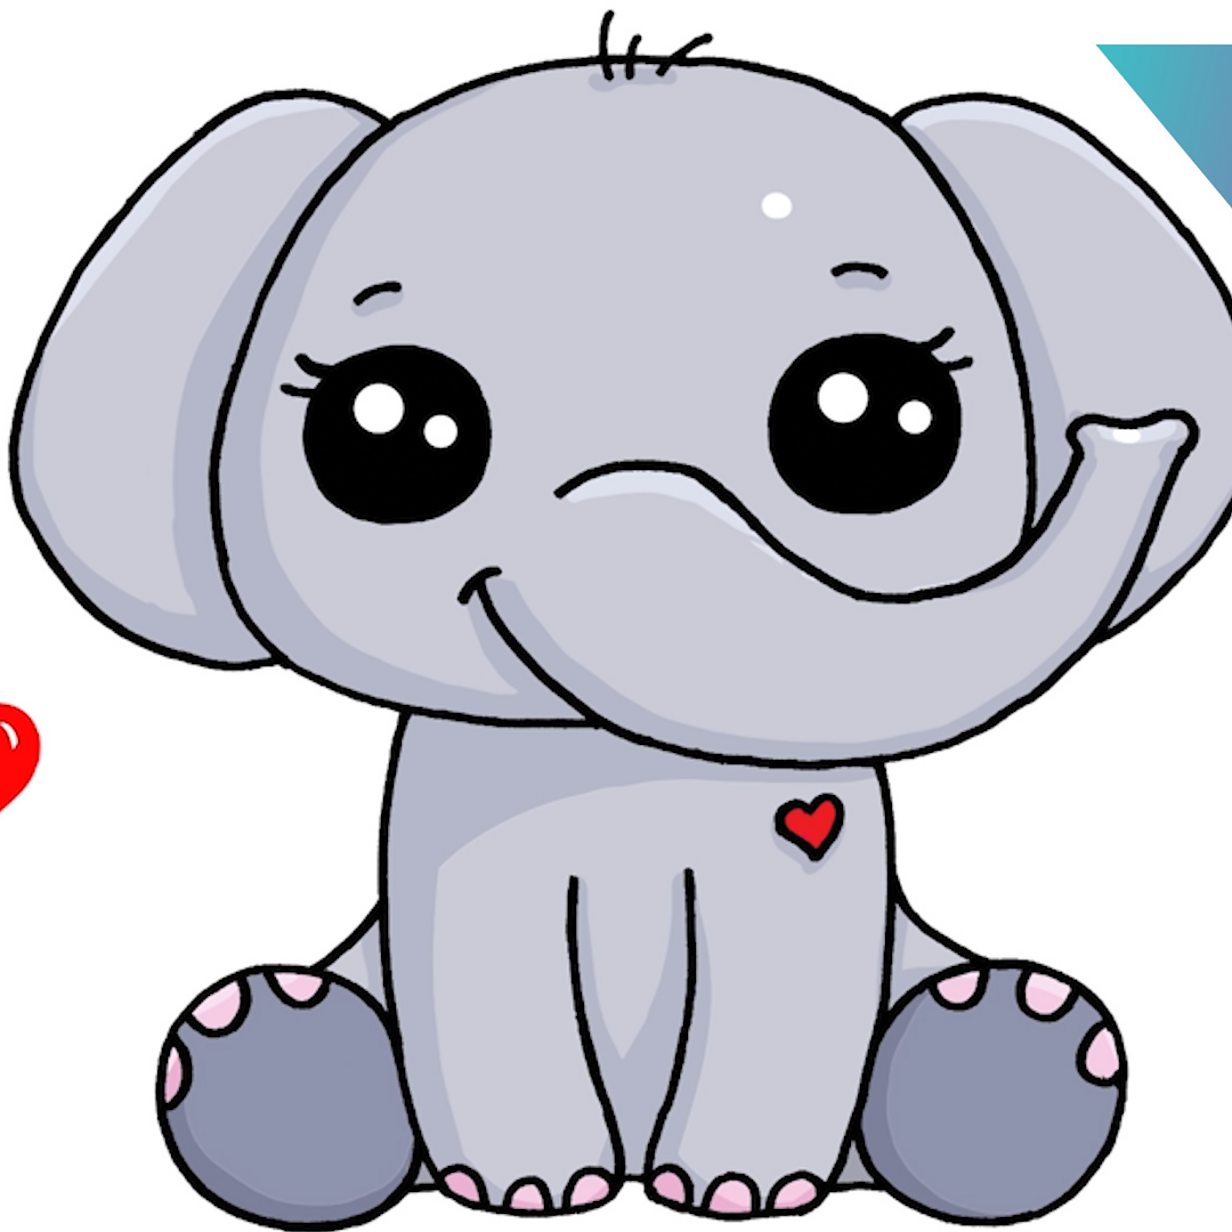 Draw and paint a baby elephant | Hey kids! Let's draw a baby elephant! (I  saw this cute illustration online but can't find the original artist for  credit) | By Kelly Creates